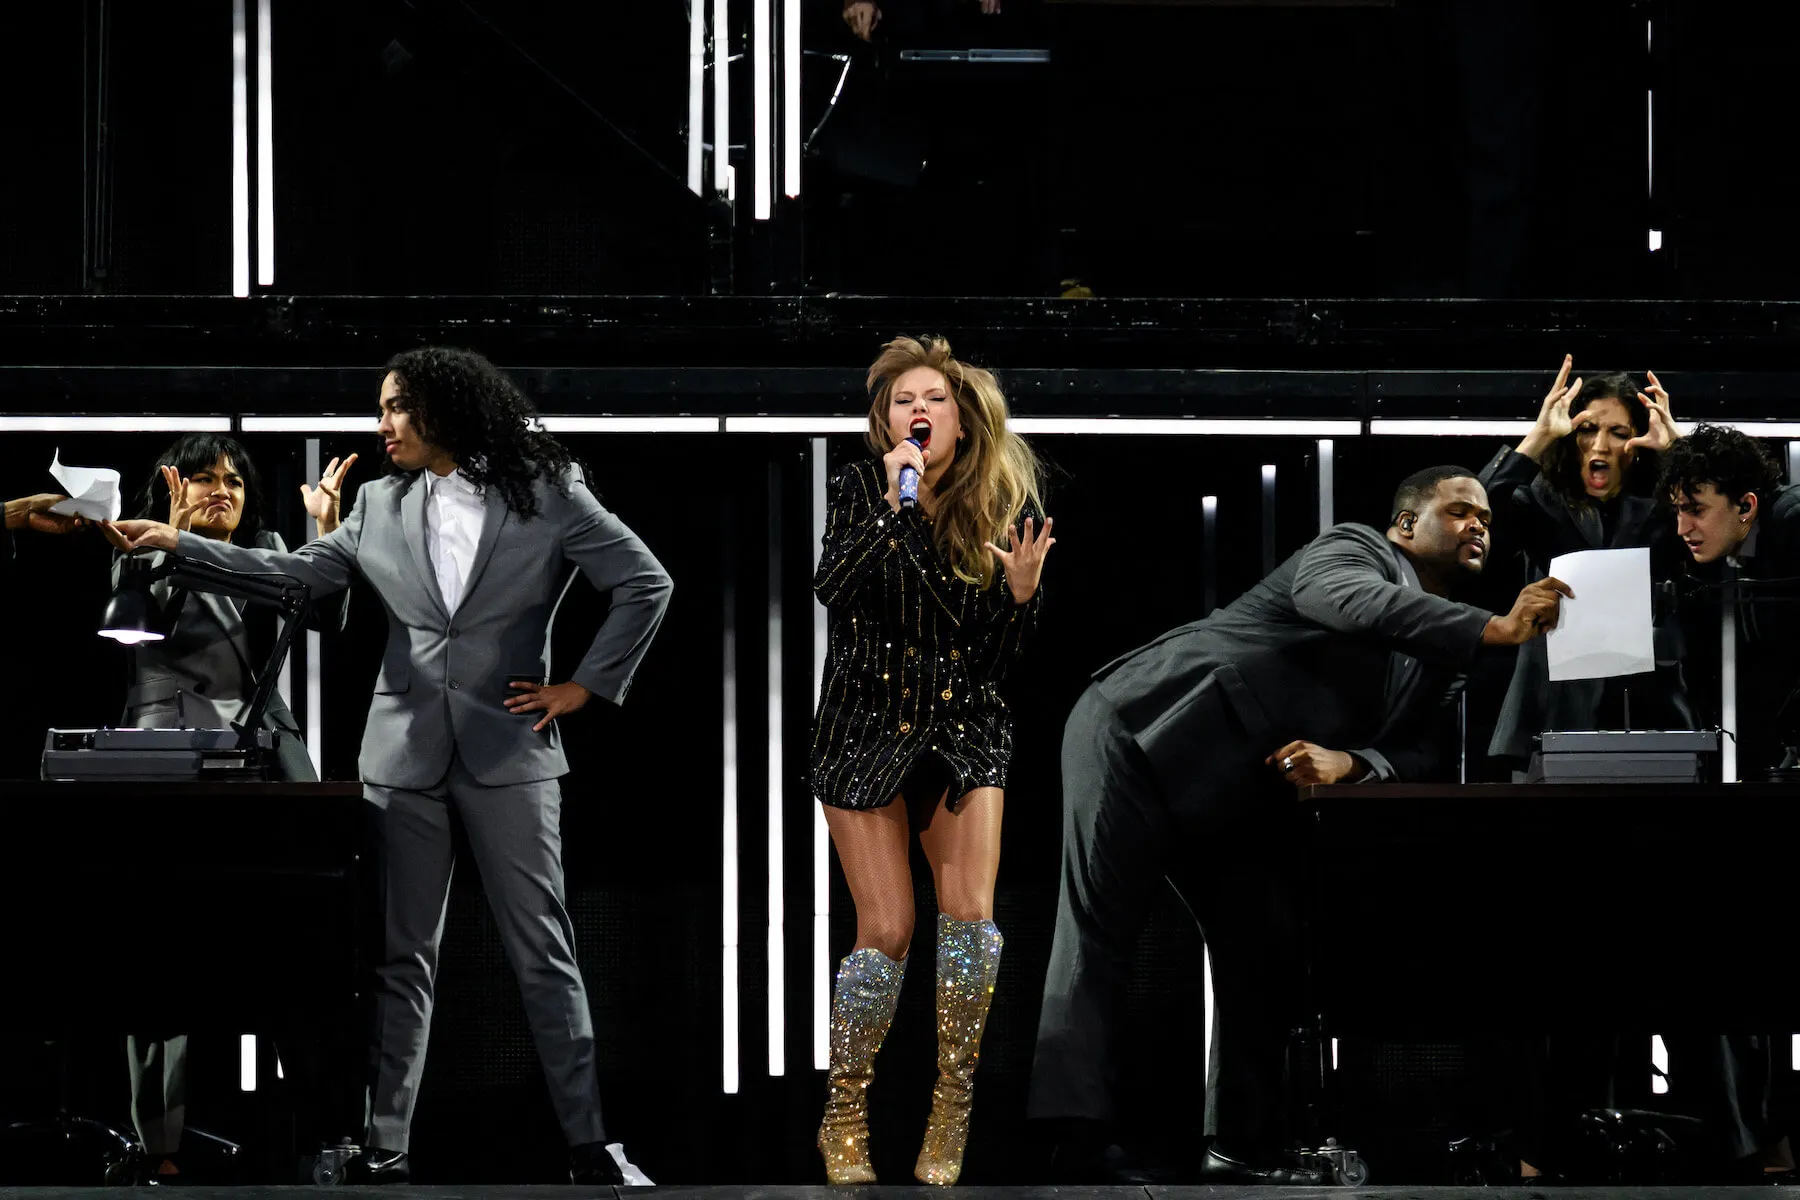 Taylor Swift wearing black and singing on stage in 'The Eras Tour' with male backup dancers in suits on either side of her